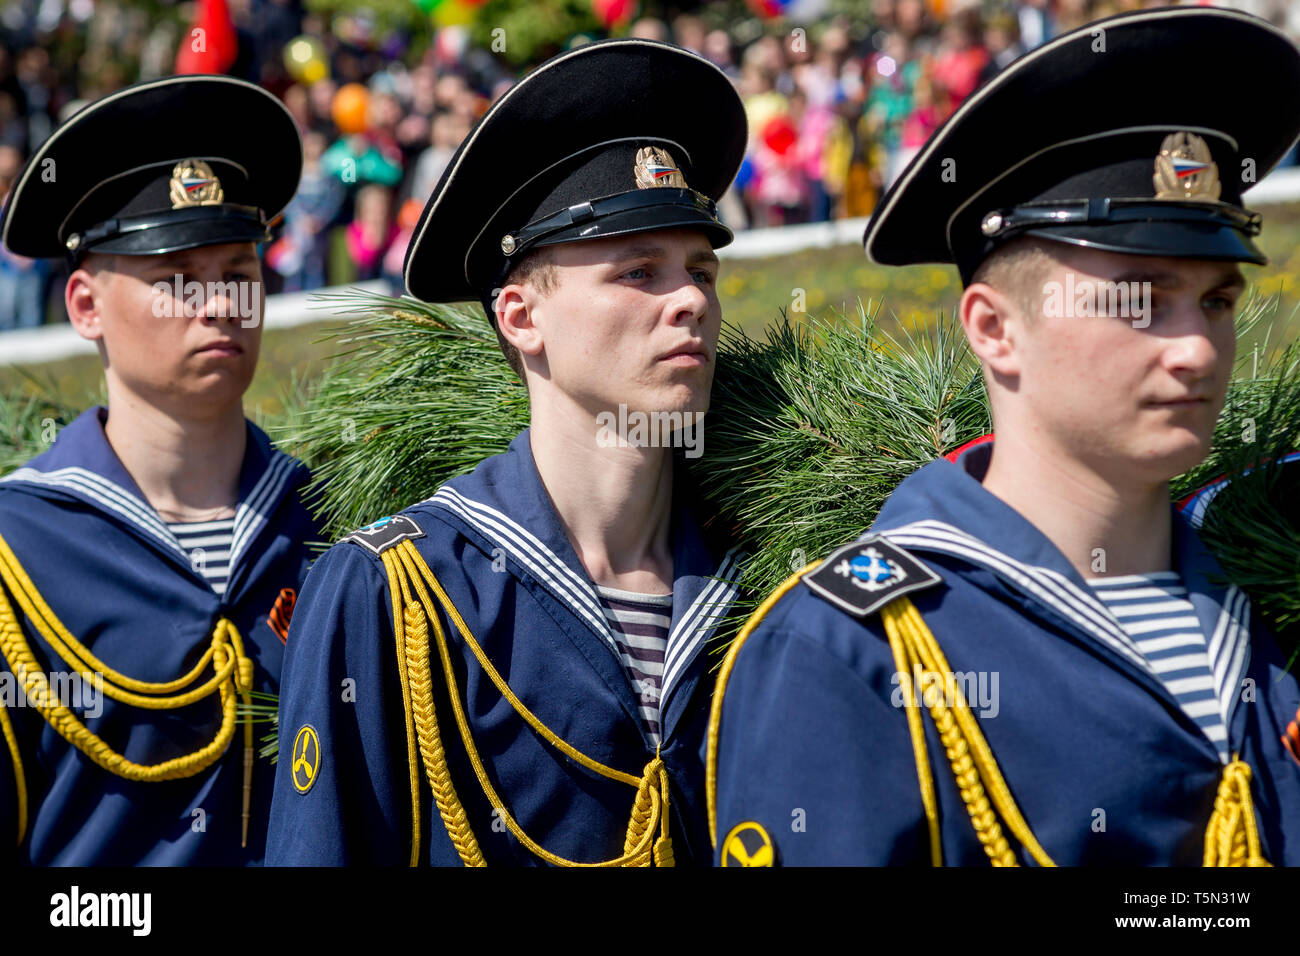 Russia, Nakhodka, 05/09/2017. Portrait of young military sailors in parade uniform march on parade on annual Victory Day on May 9. Victory of USSR ove Stock Photo